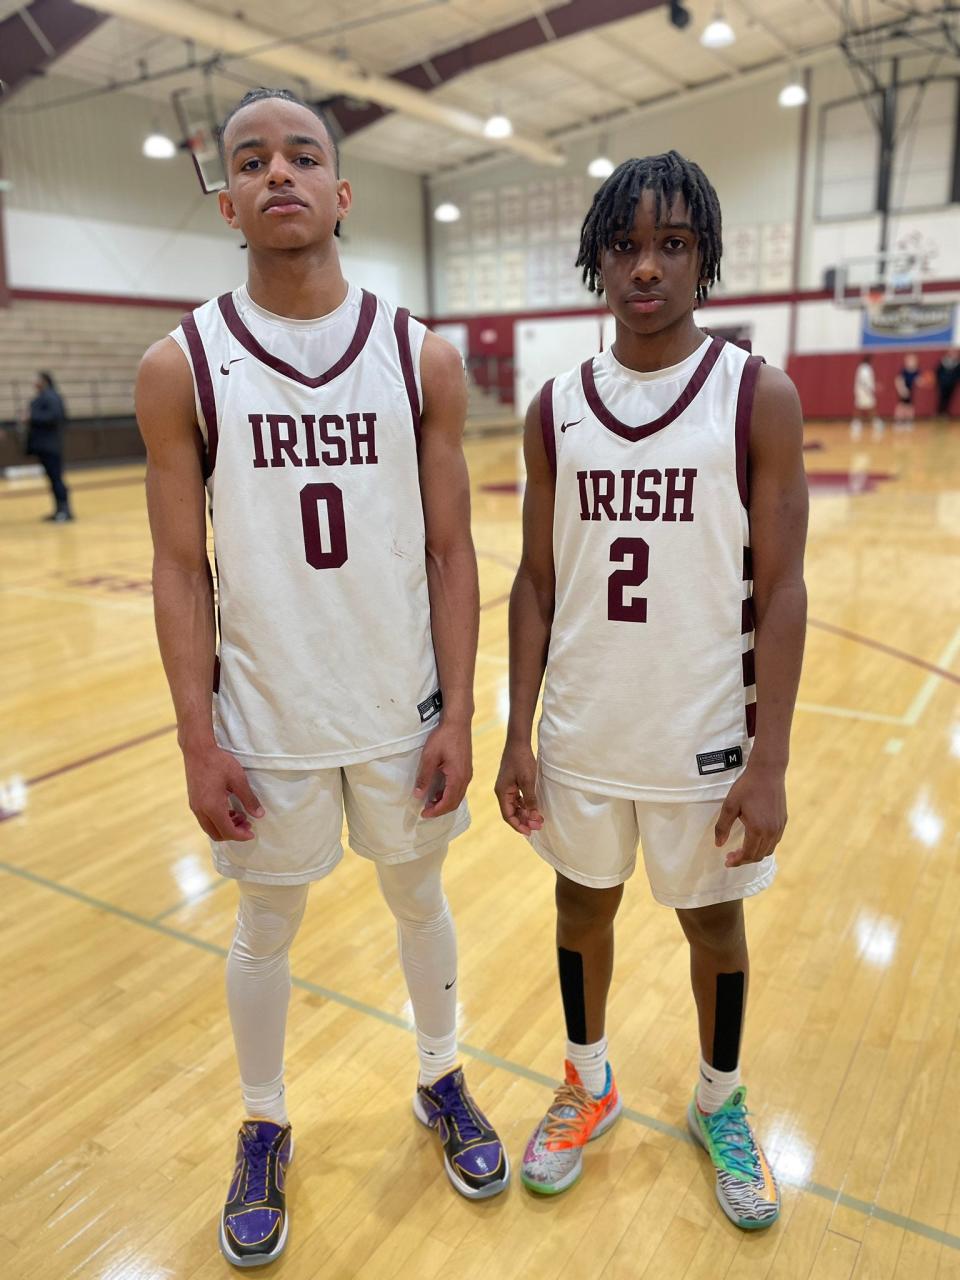 Aquinas junior Jadeir Breedlove (0) dropped 27 points in a 60-47 win over Monroe. Sophomore Christian McCullough (2) scored 19 to help the Irish improve to 10-0.